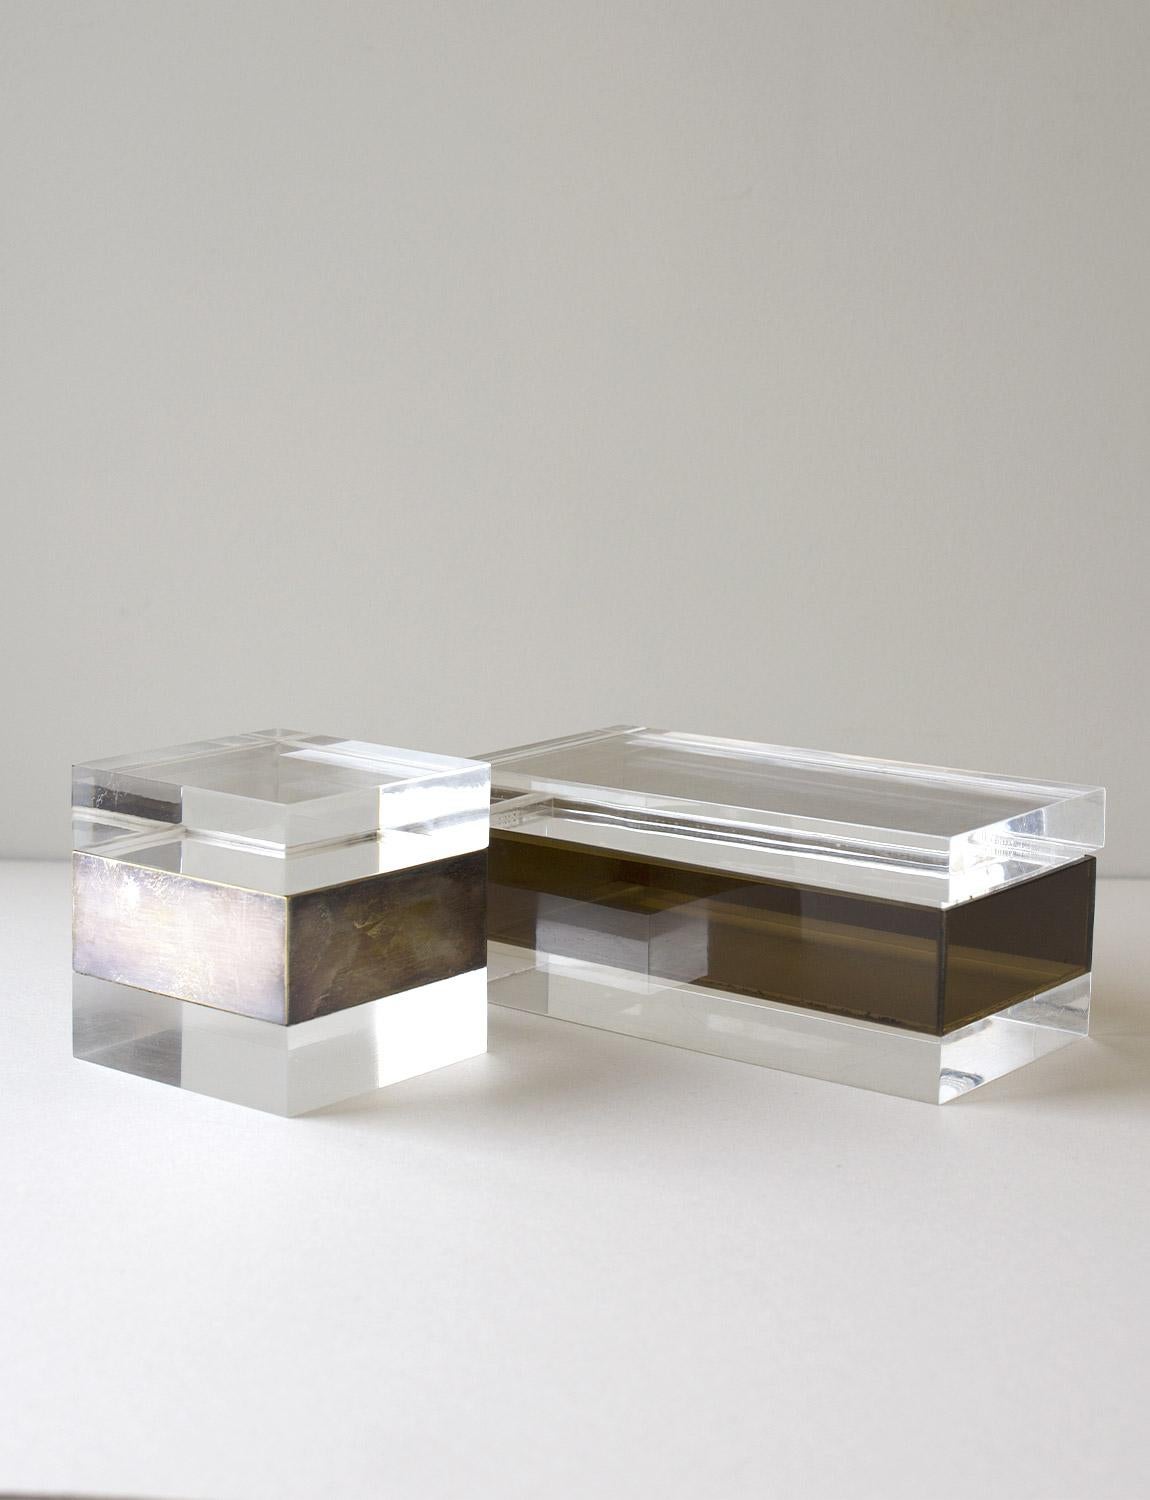 Two Italian 1960s/70s plexiglass ornament boxes. The rectangular box has a thick perspex brown brand and the cube shaped box has a metal band. The pair look extremely chic on a desk or coffee table.

Dimensions: Rectangular box H8cm X W21cm X D11cm,